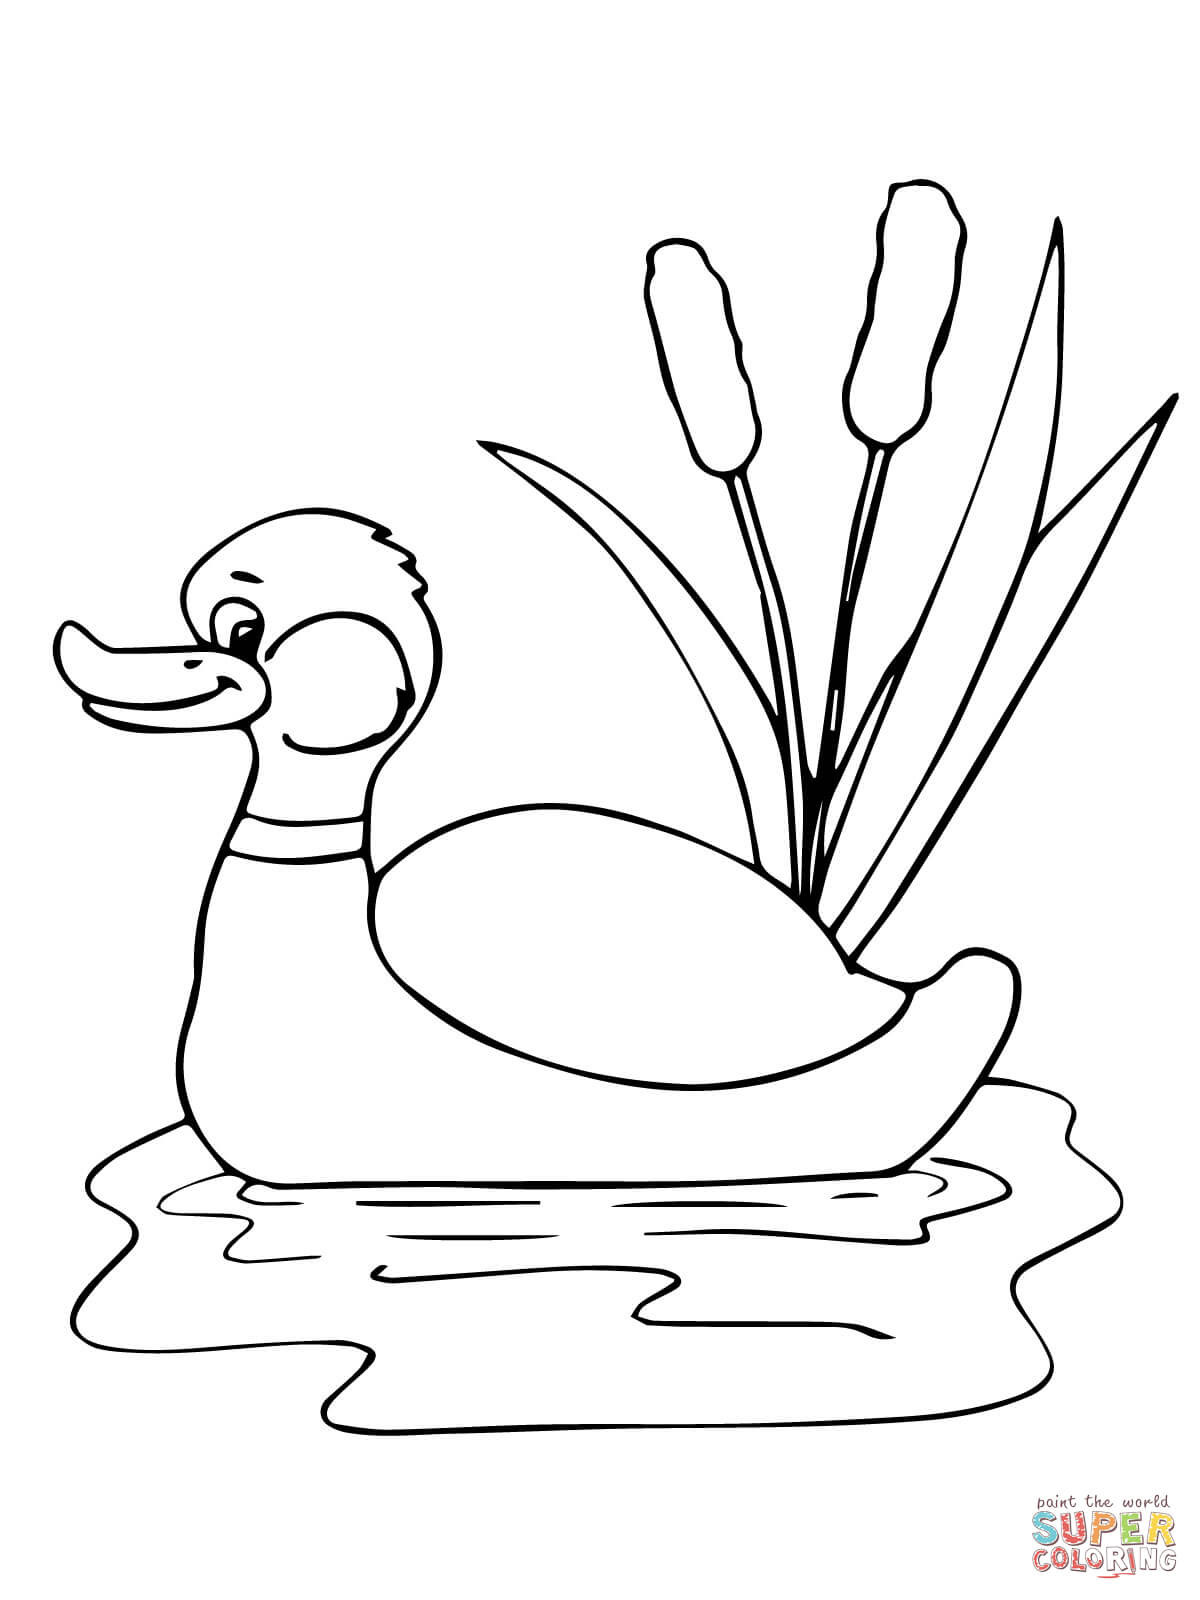 Ponds Coloring Pages
 Pond coloring Download Pond coloring